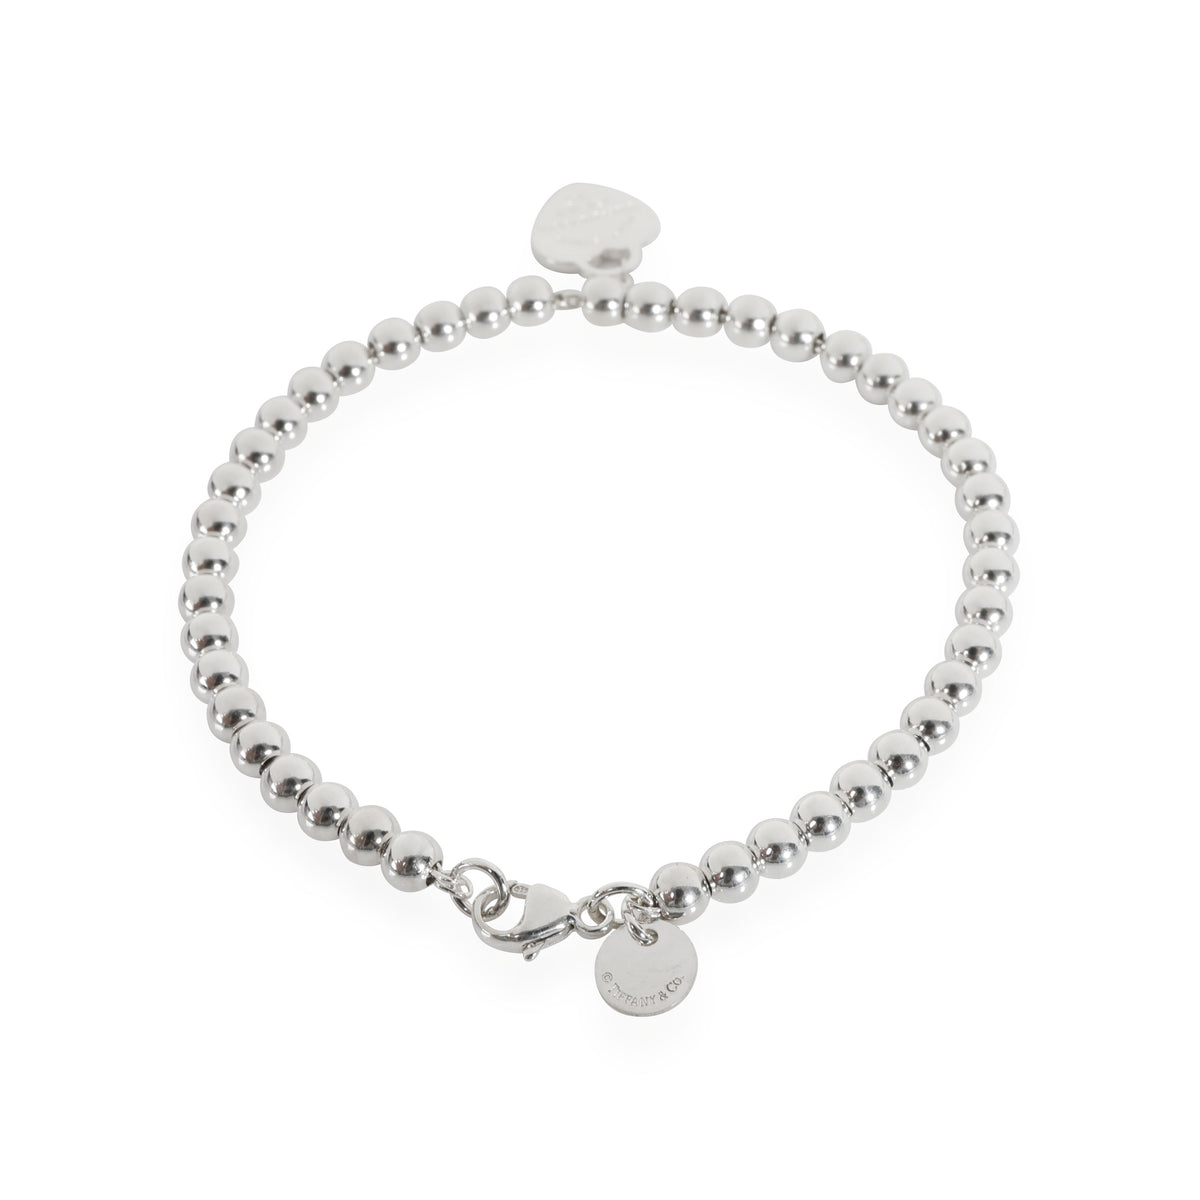 TReturn to Tiffany Heart Tag Bead Bracelet in  Sterling Silver